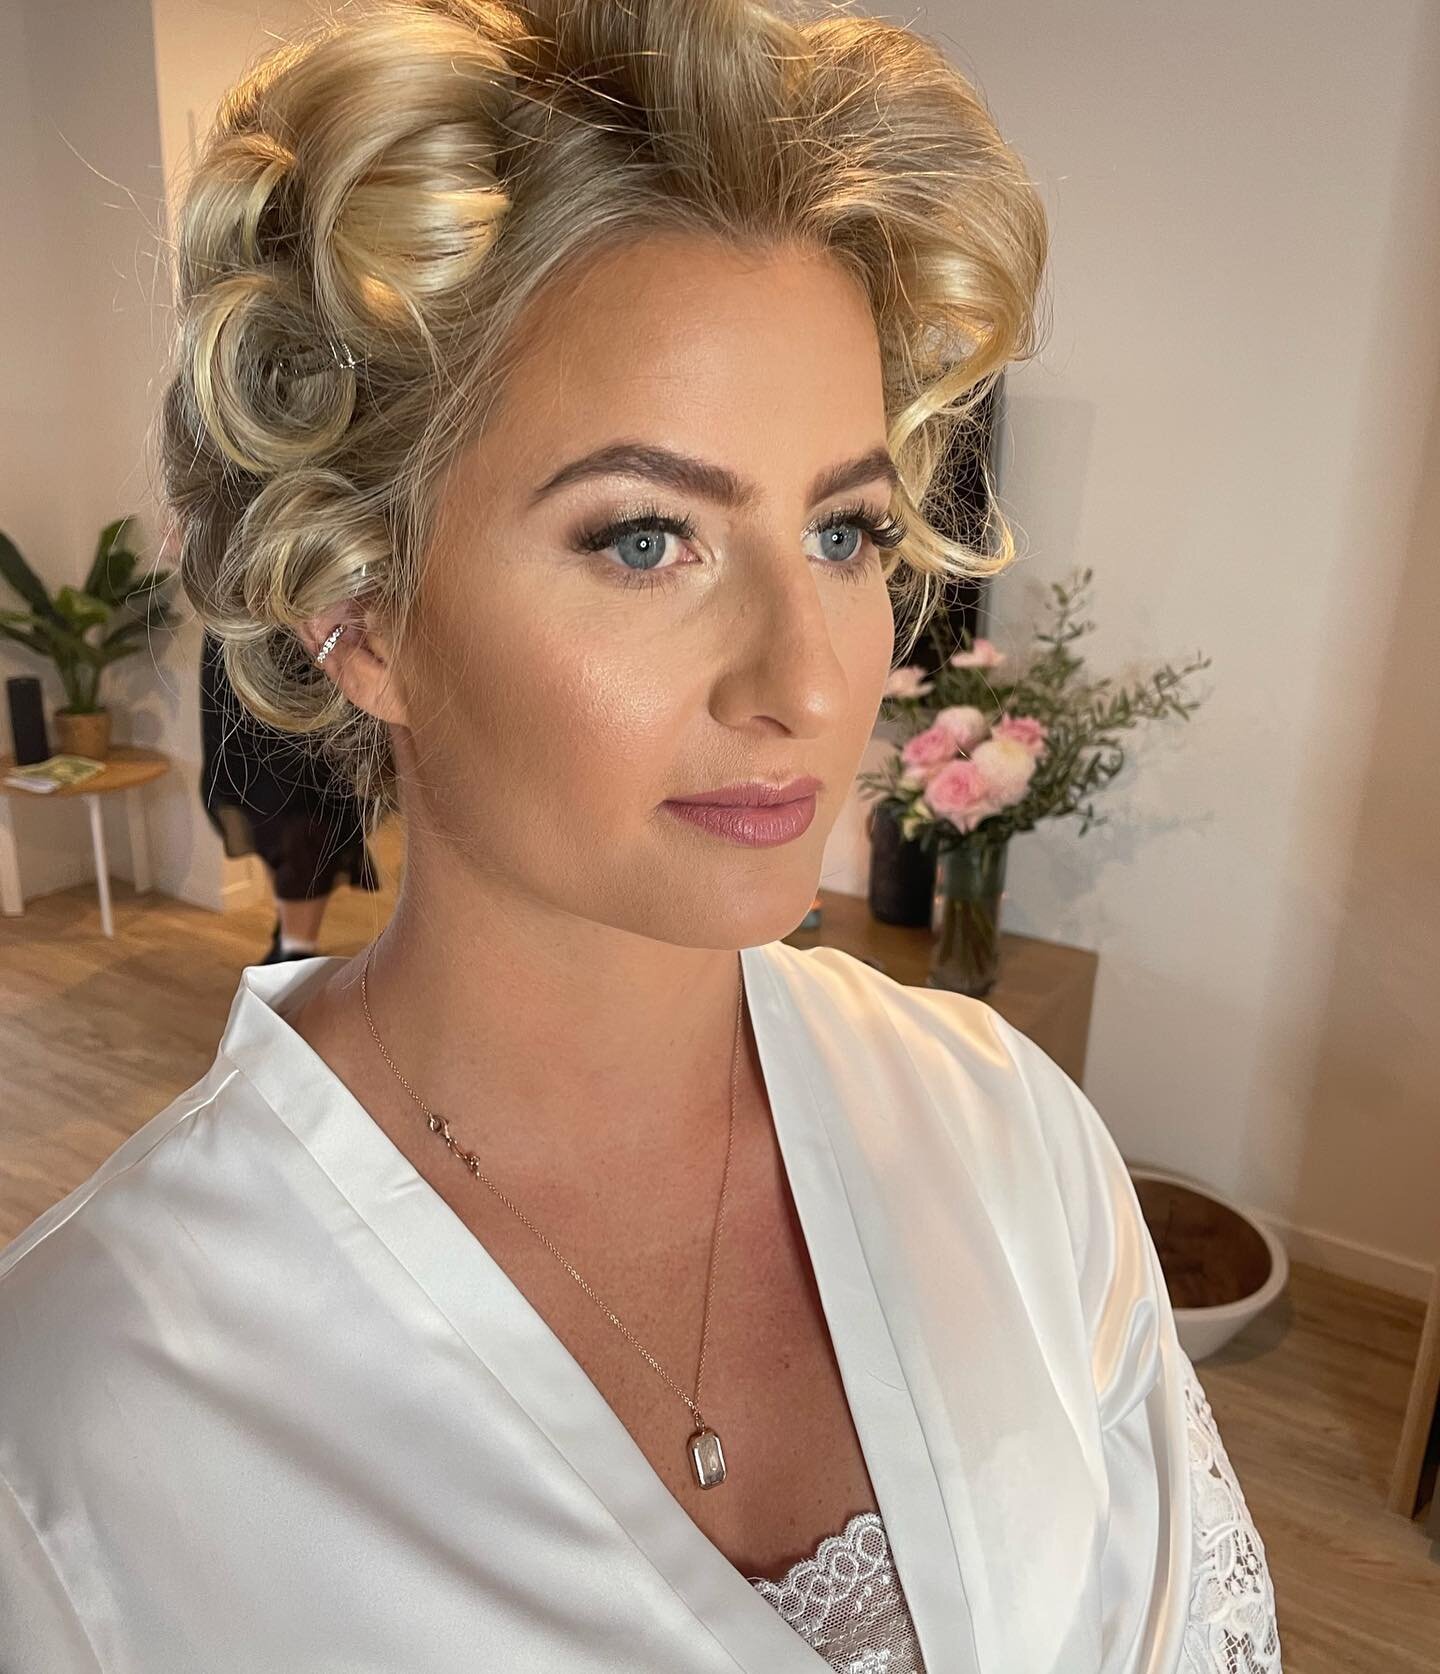 We love a gorgeous glowing base and neutral tones 🤩✨🤍 

💌 : Email us via the &lsquo;contact&rsquo; button in our bio

.
.
.
.
.
.
.
.
.

#brisbanebridalhairandmakeup 
#goldcoastmakeupartist 
#goldcoastweddings #brisbanebridal #sunshinecoast #queen